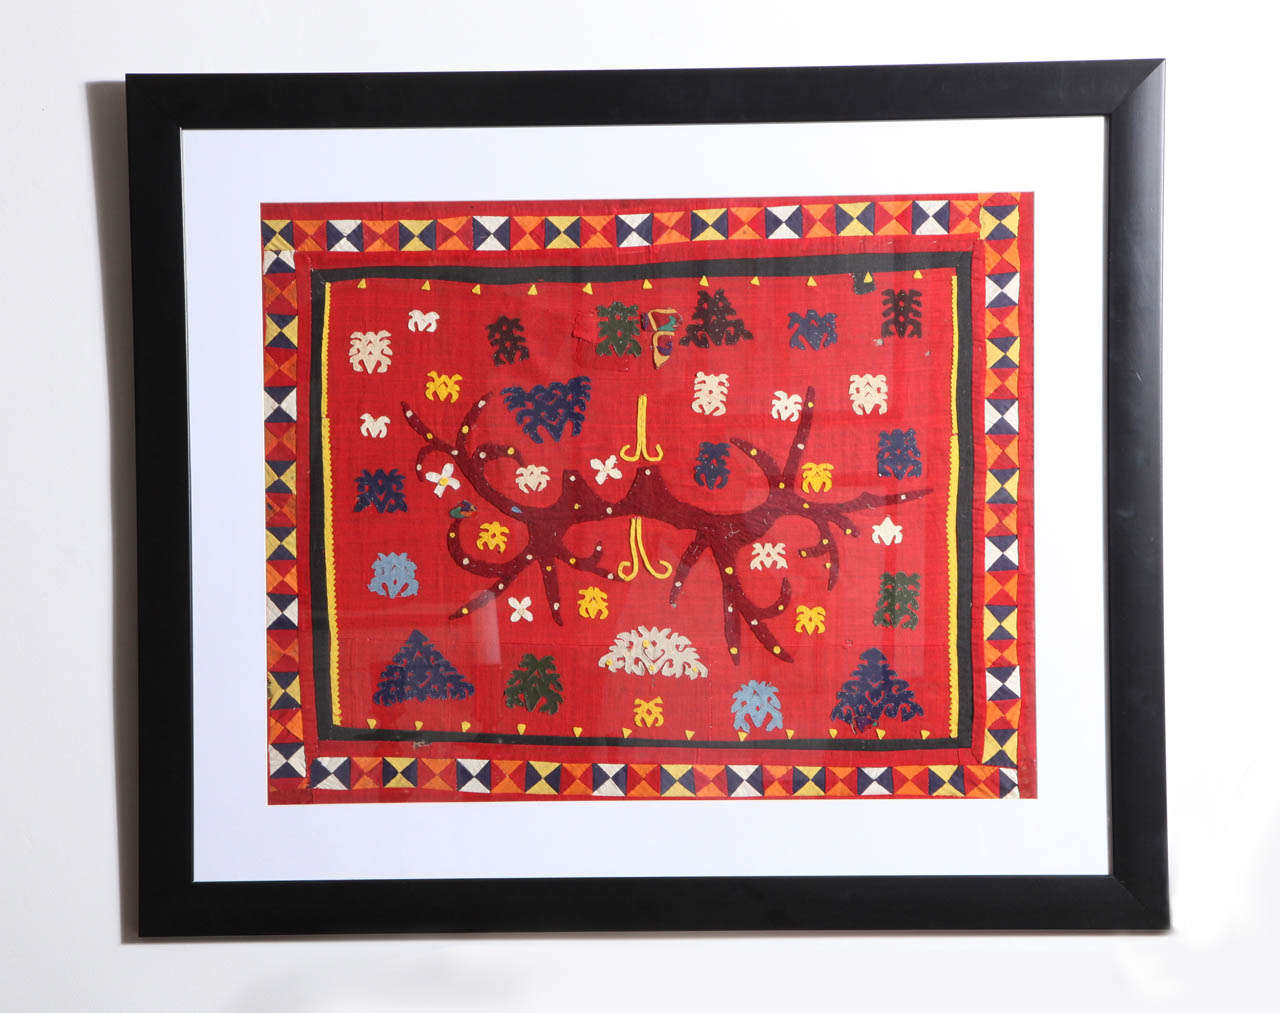 A framed Lampung Fabric from Sumatra. Hand-stitched appliques on red cloth in a traditional design.  100 years old.